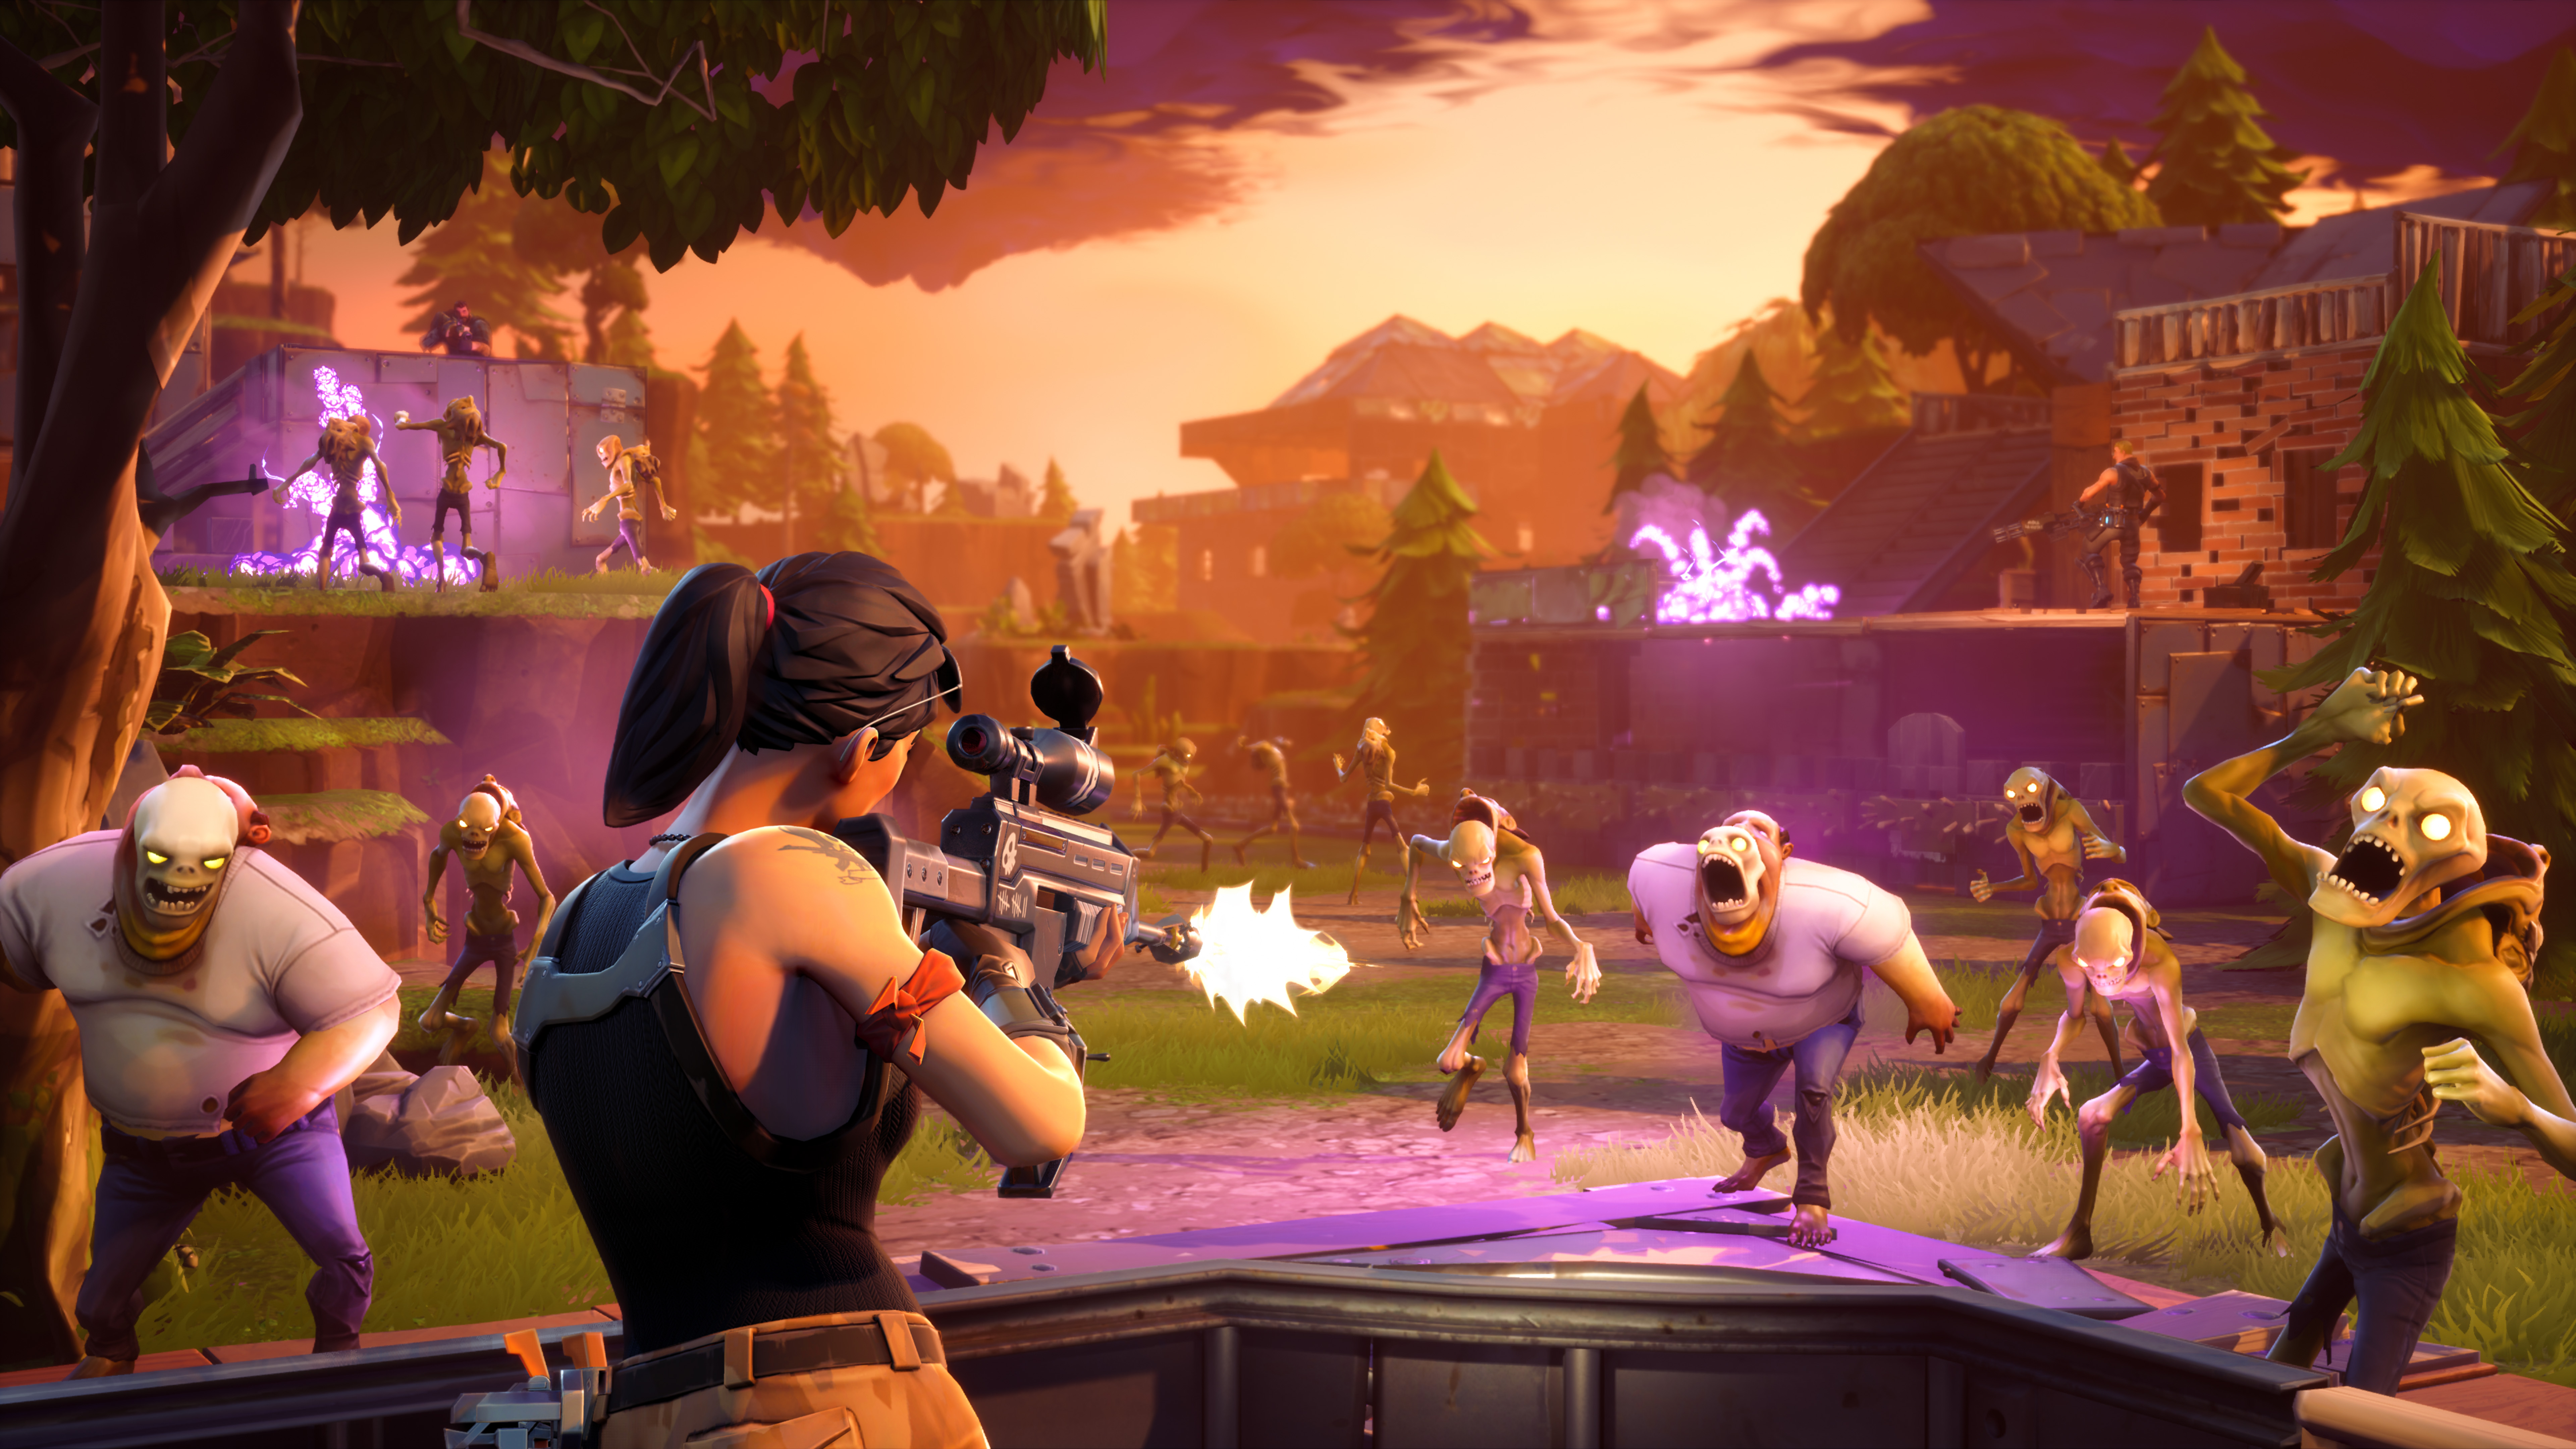 enlarge at its best fortnite looks and feels like this nicely staged promo pic of in game action however so many free to play annoyances drag this - fortnite free in game loot